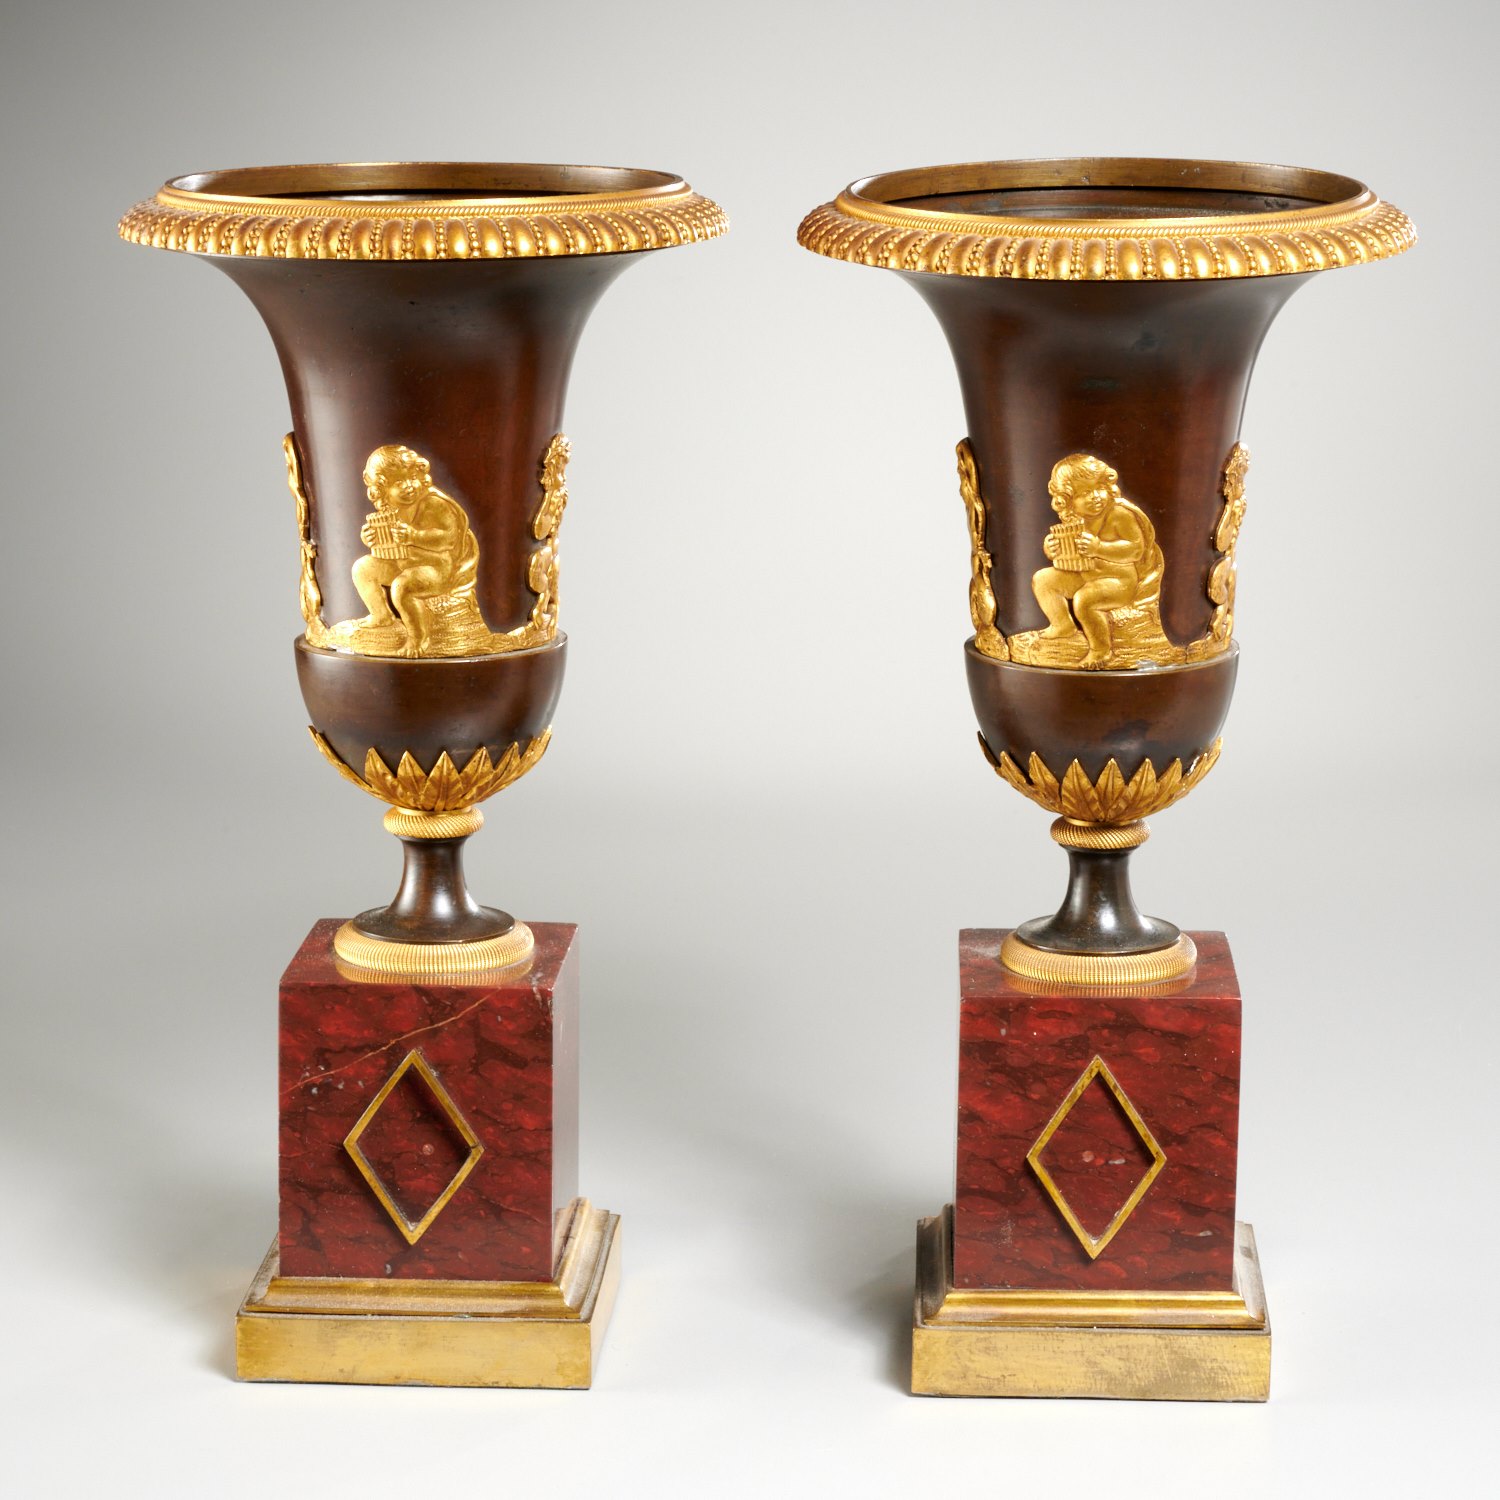 PAIR NEOCLASSICAL BRONZE URNS CONVERTED